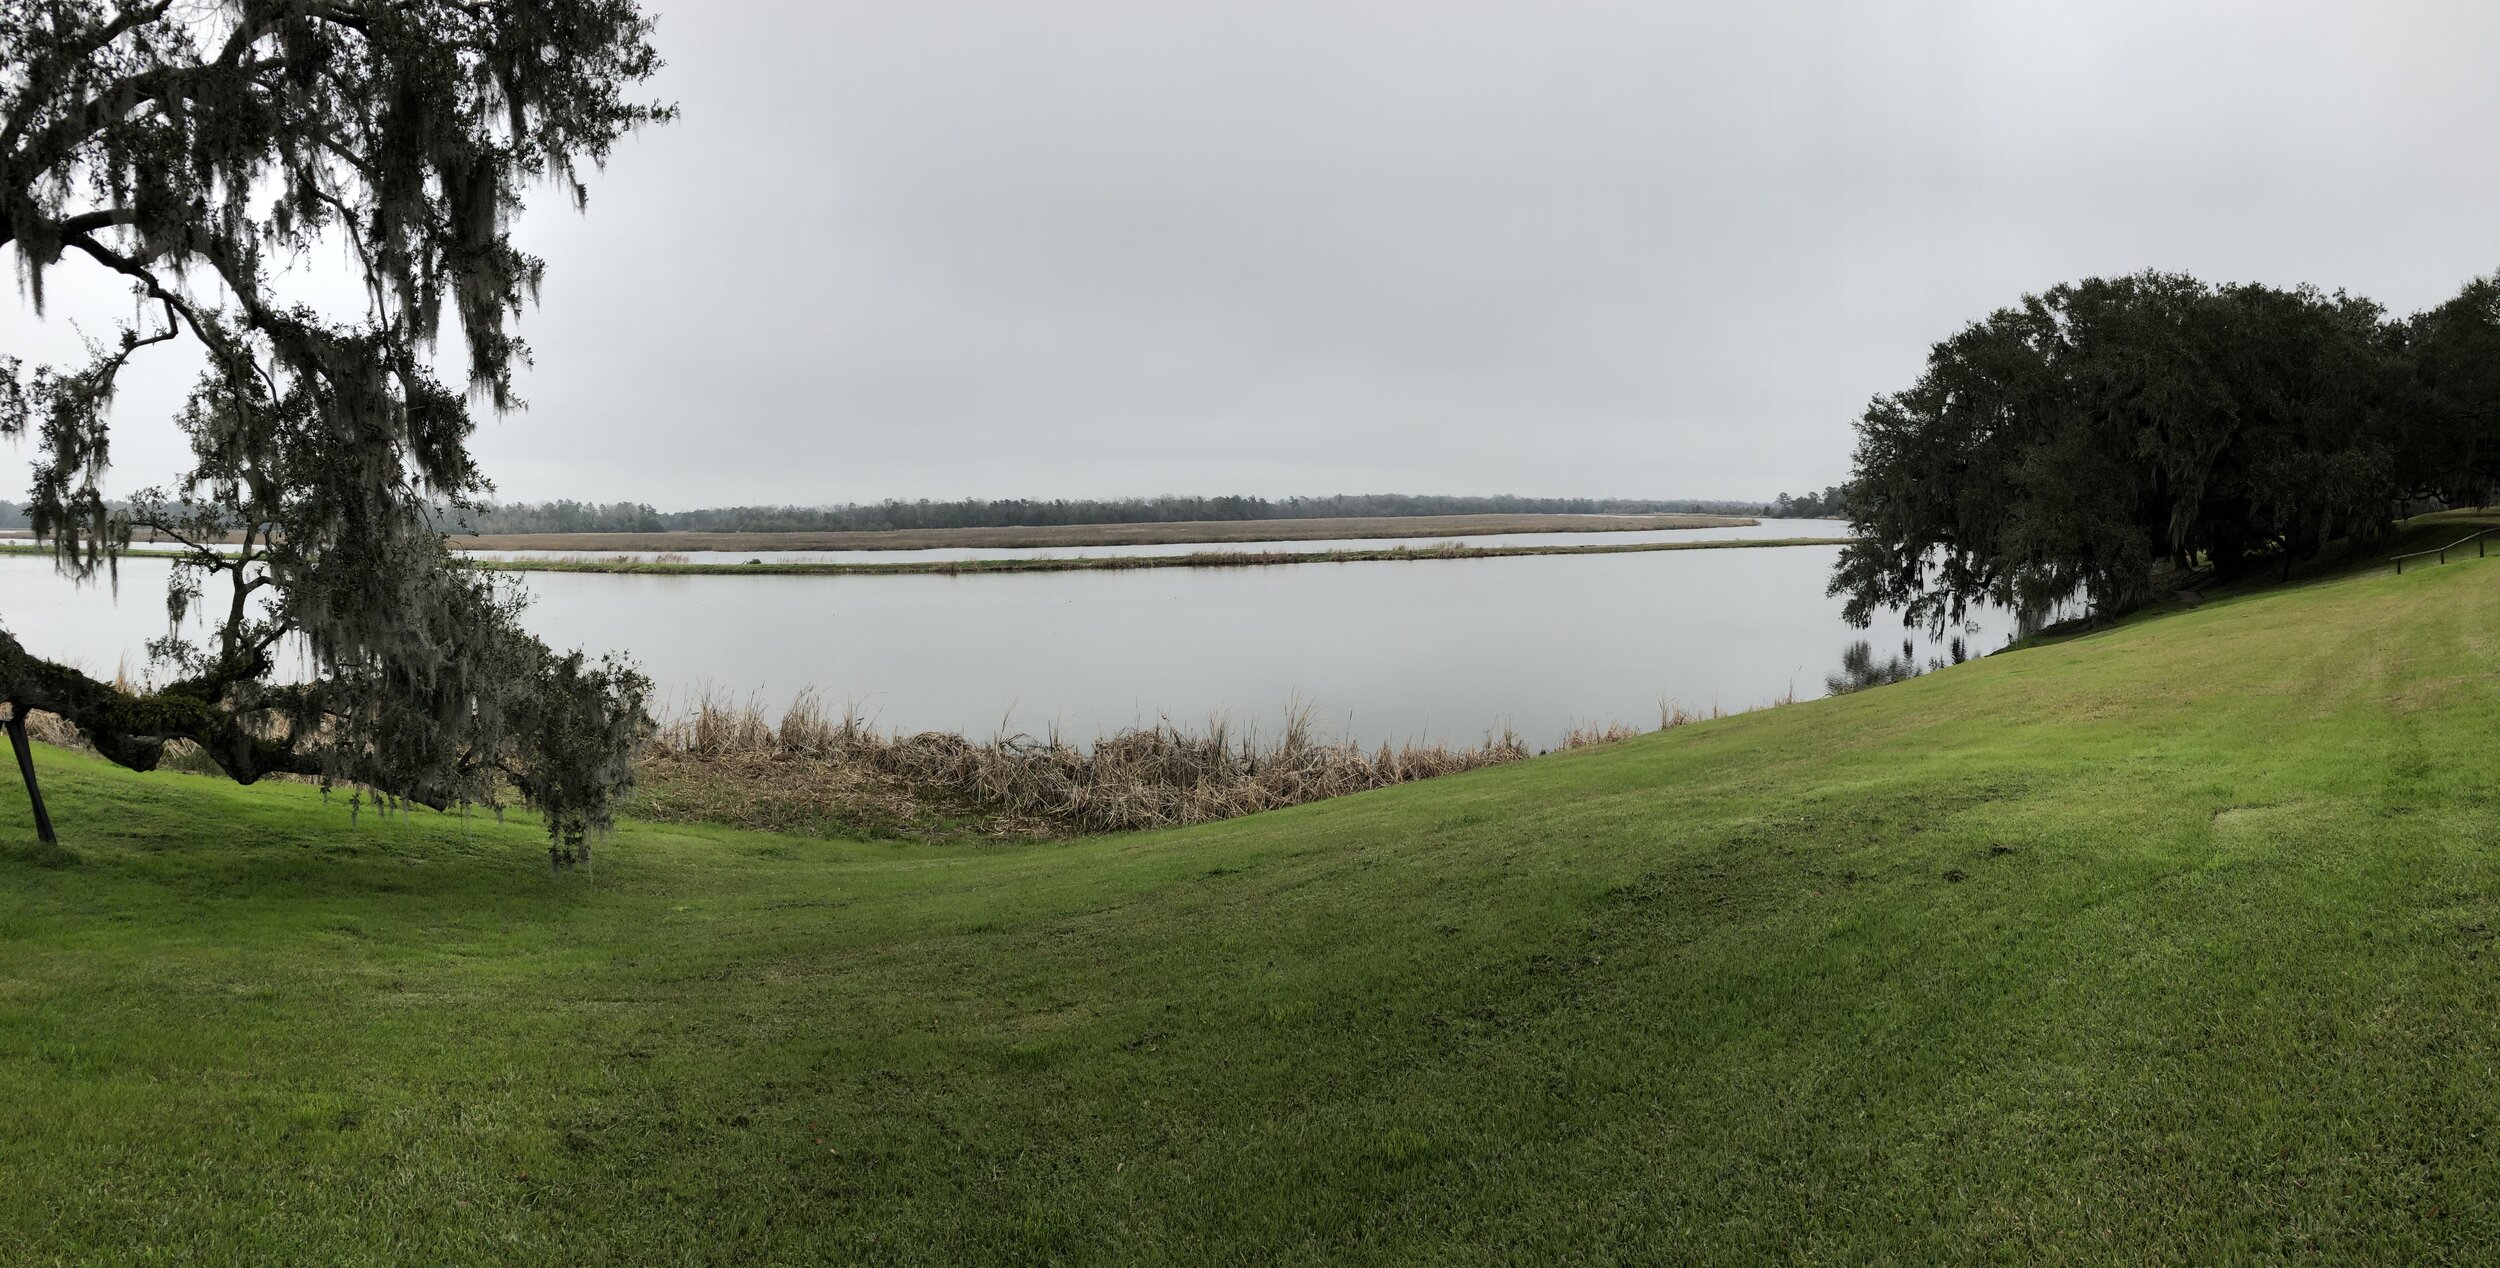  The flooded eighteenth and nineteenth century rice fields at the Middleton Plantation, with the Ashley River in the background. Originally swamp forest, the land was cleared by African American slaves who also constructed and managed the rice planta